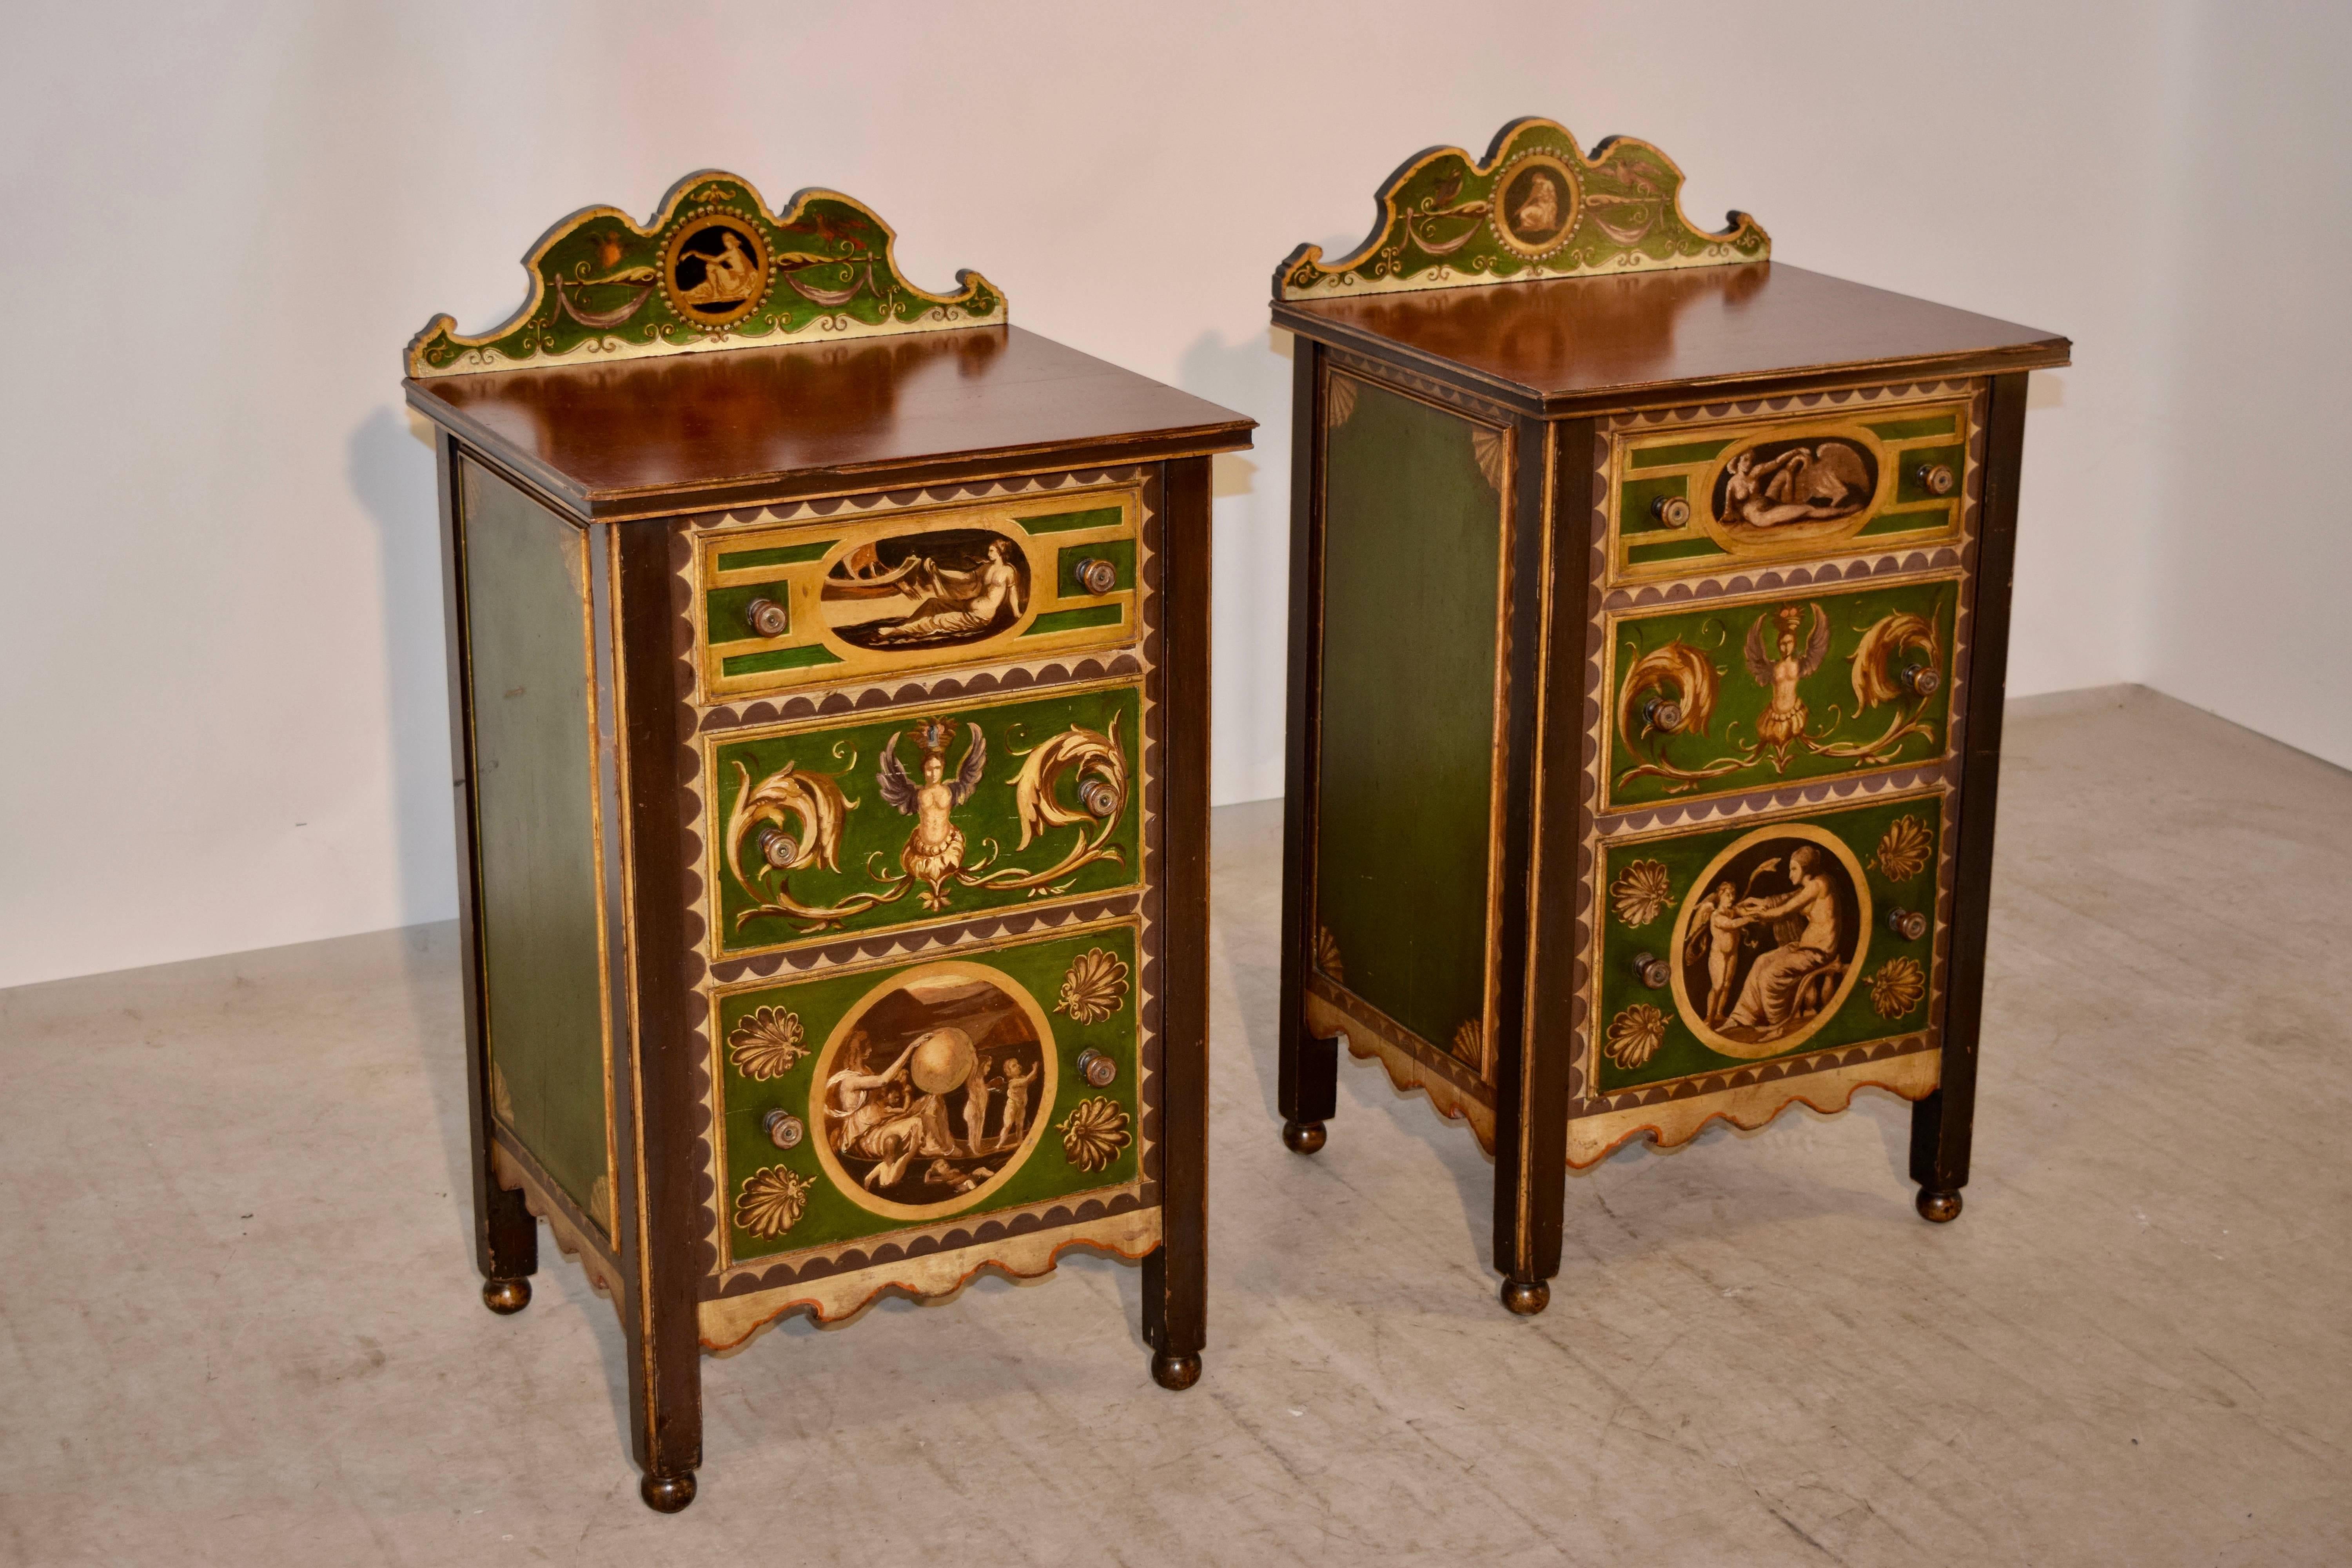 Pair of exquisitely hand-painted side tables from Italy. They have wonderfully painted cabinets, with three drawers in the front and hand panelled sides. The backsplashes are shaped and hand-painted as well to compliment the drawer fronts and the